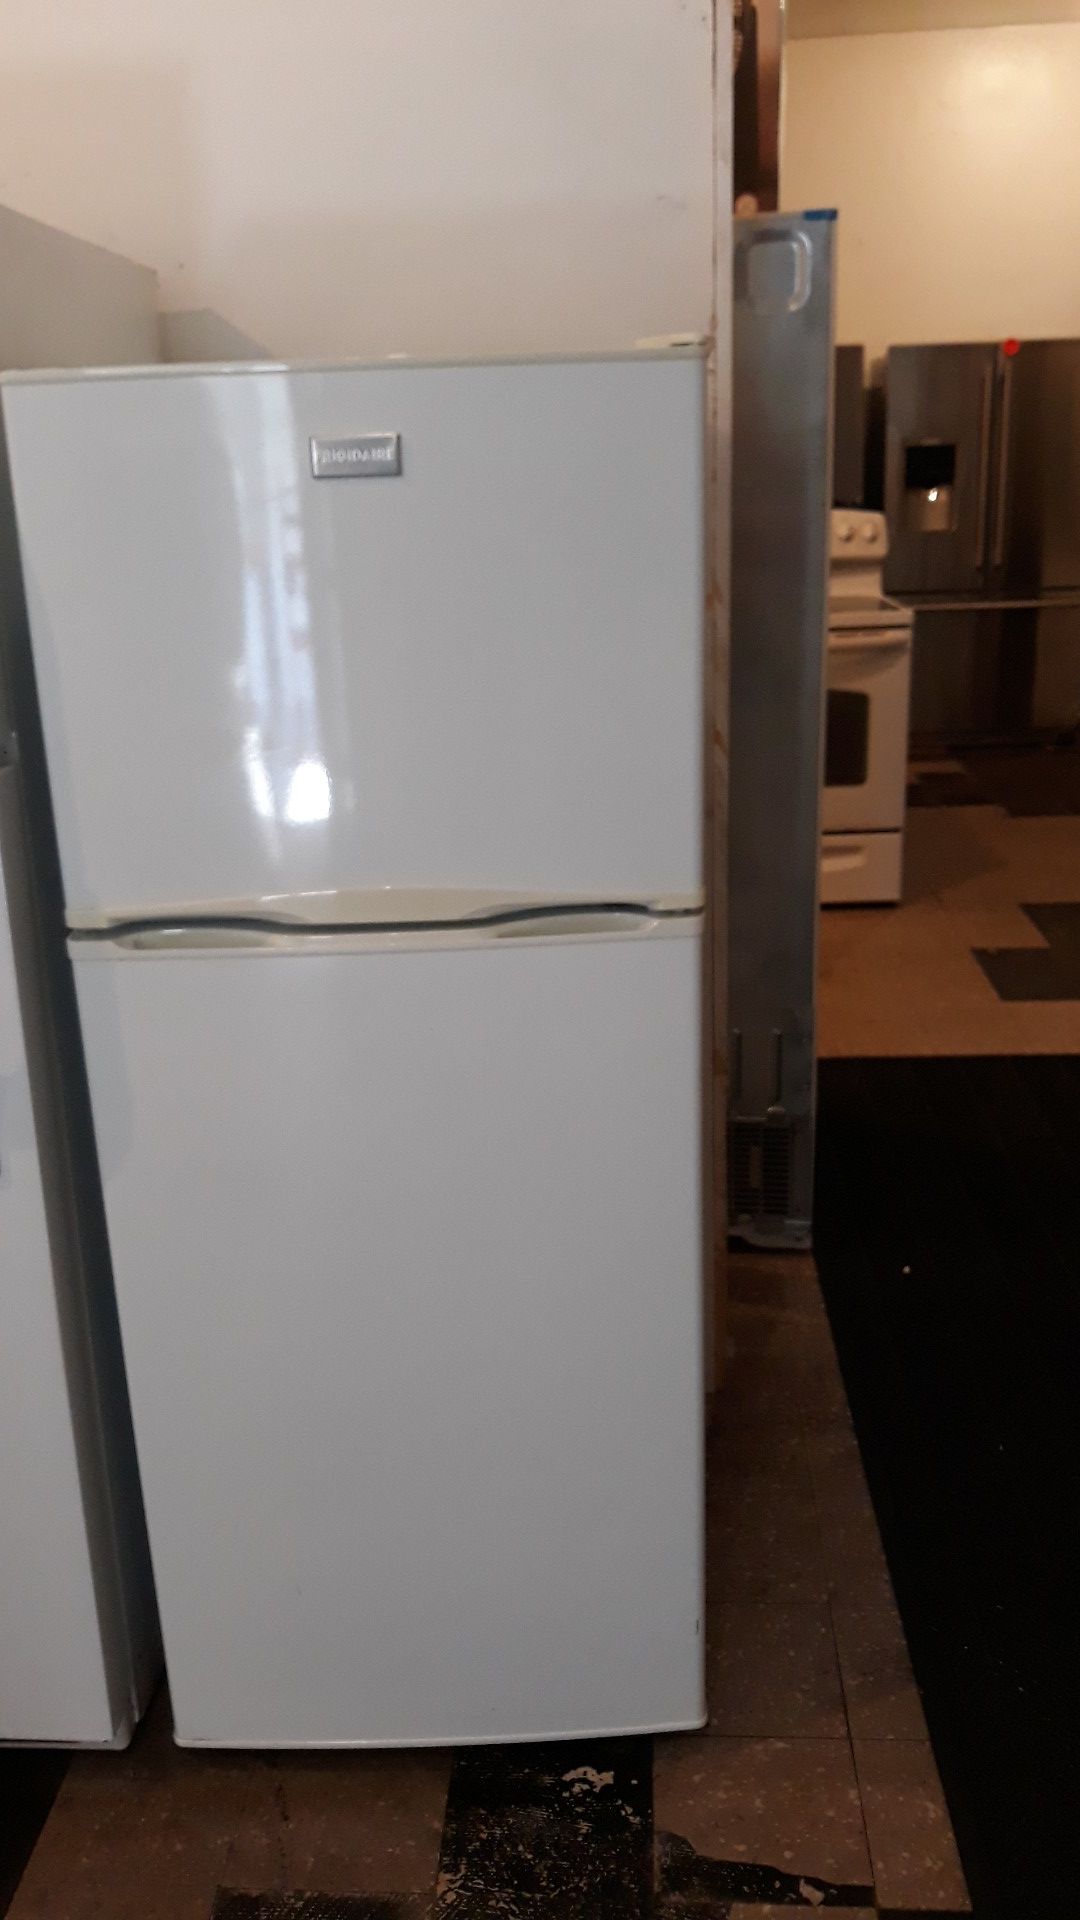 FRIGIDAIRE TOP AND BOTTOM REFRIGERATOR EXCELLENT CONDITION 24" 4 MONTHS WARRANTY